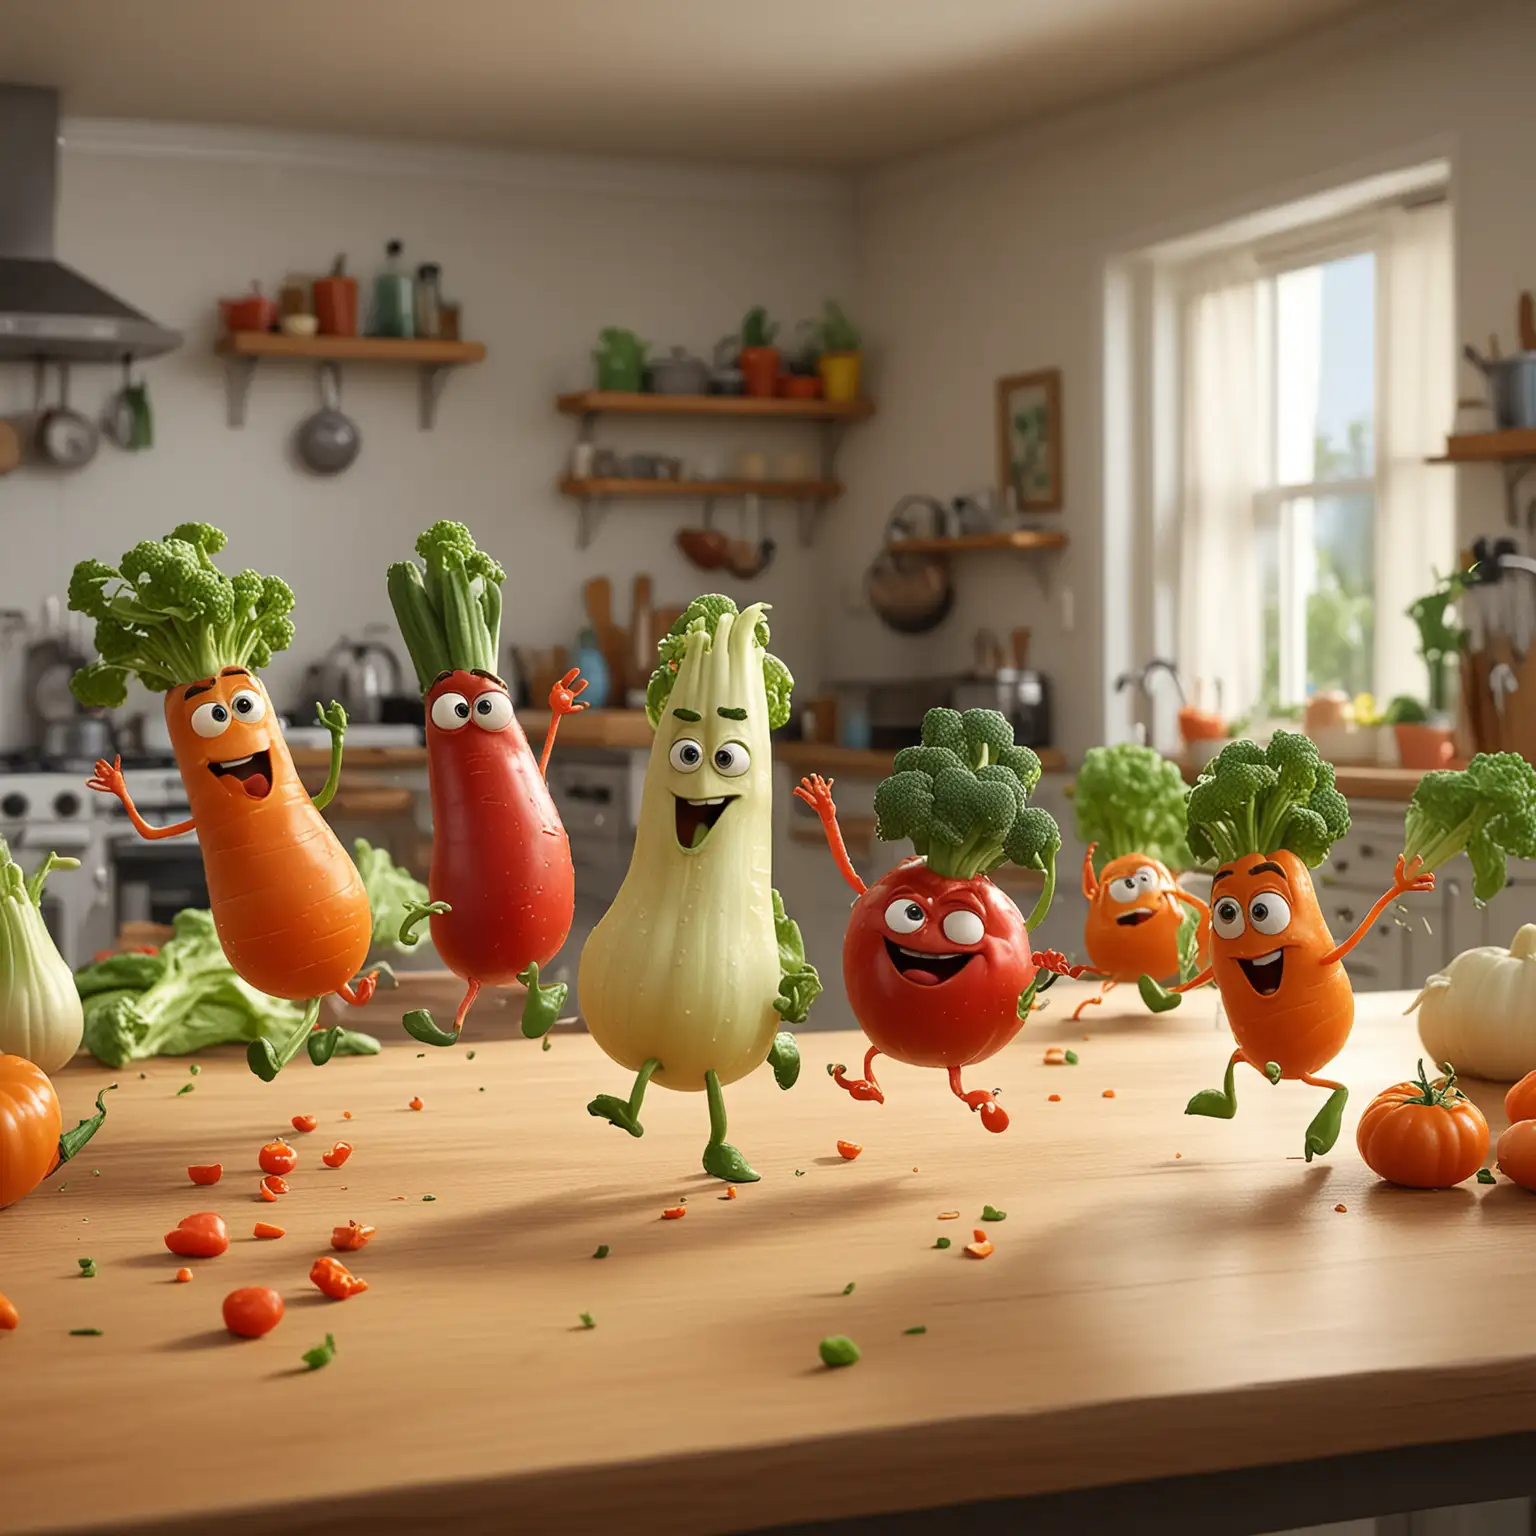 pixar style vegetables dancing on a kitchen table
